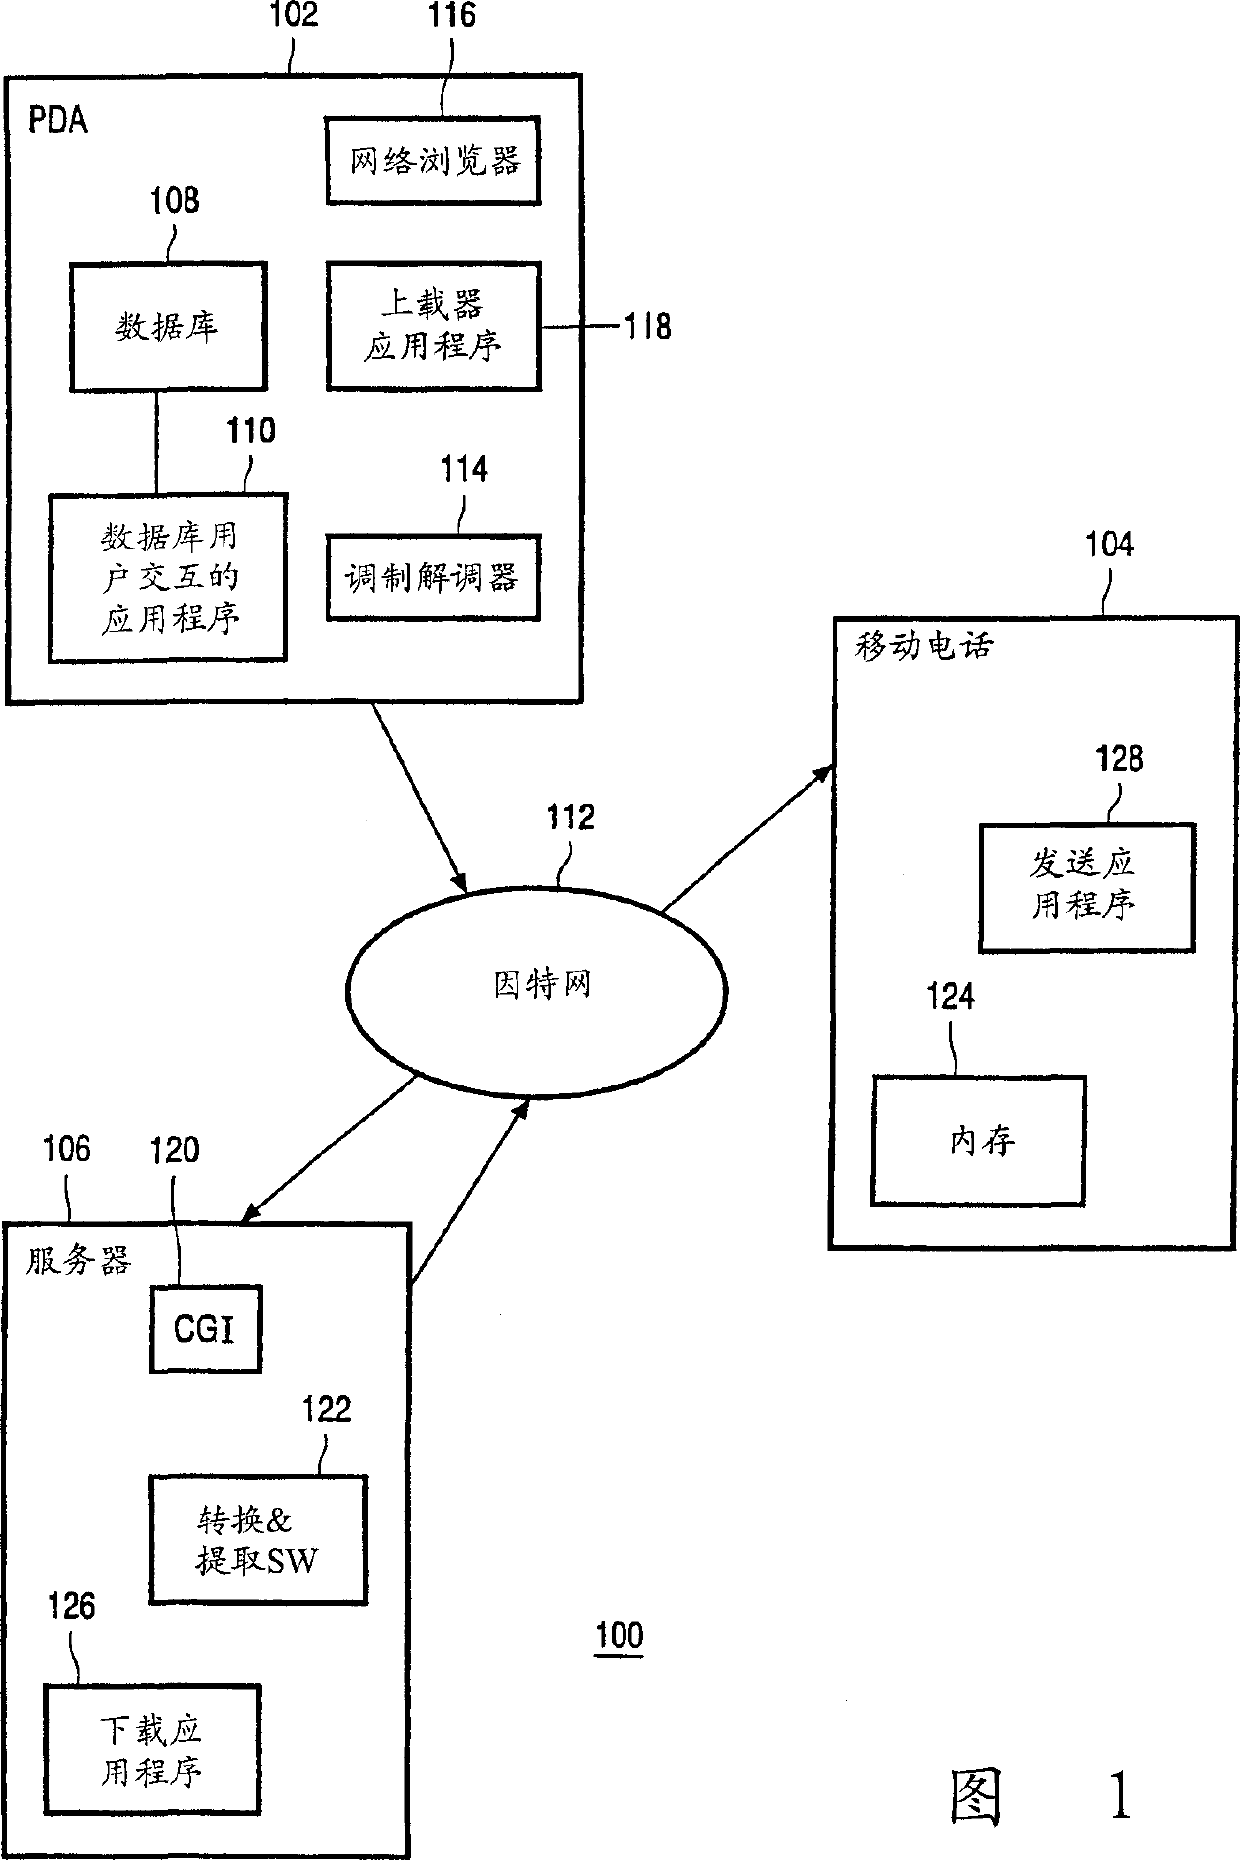 Shared address data service for personal CE apparatus